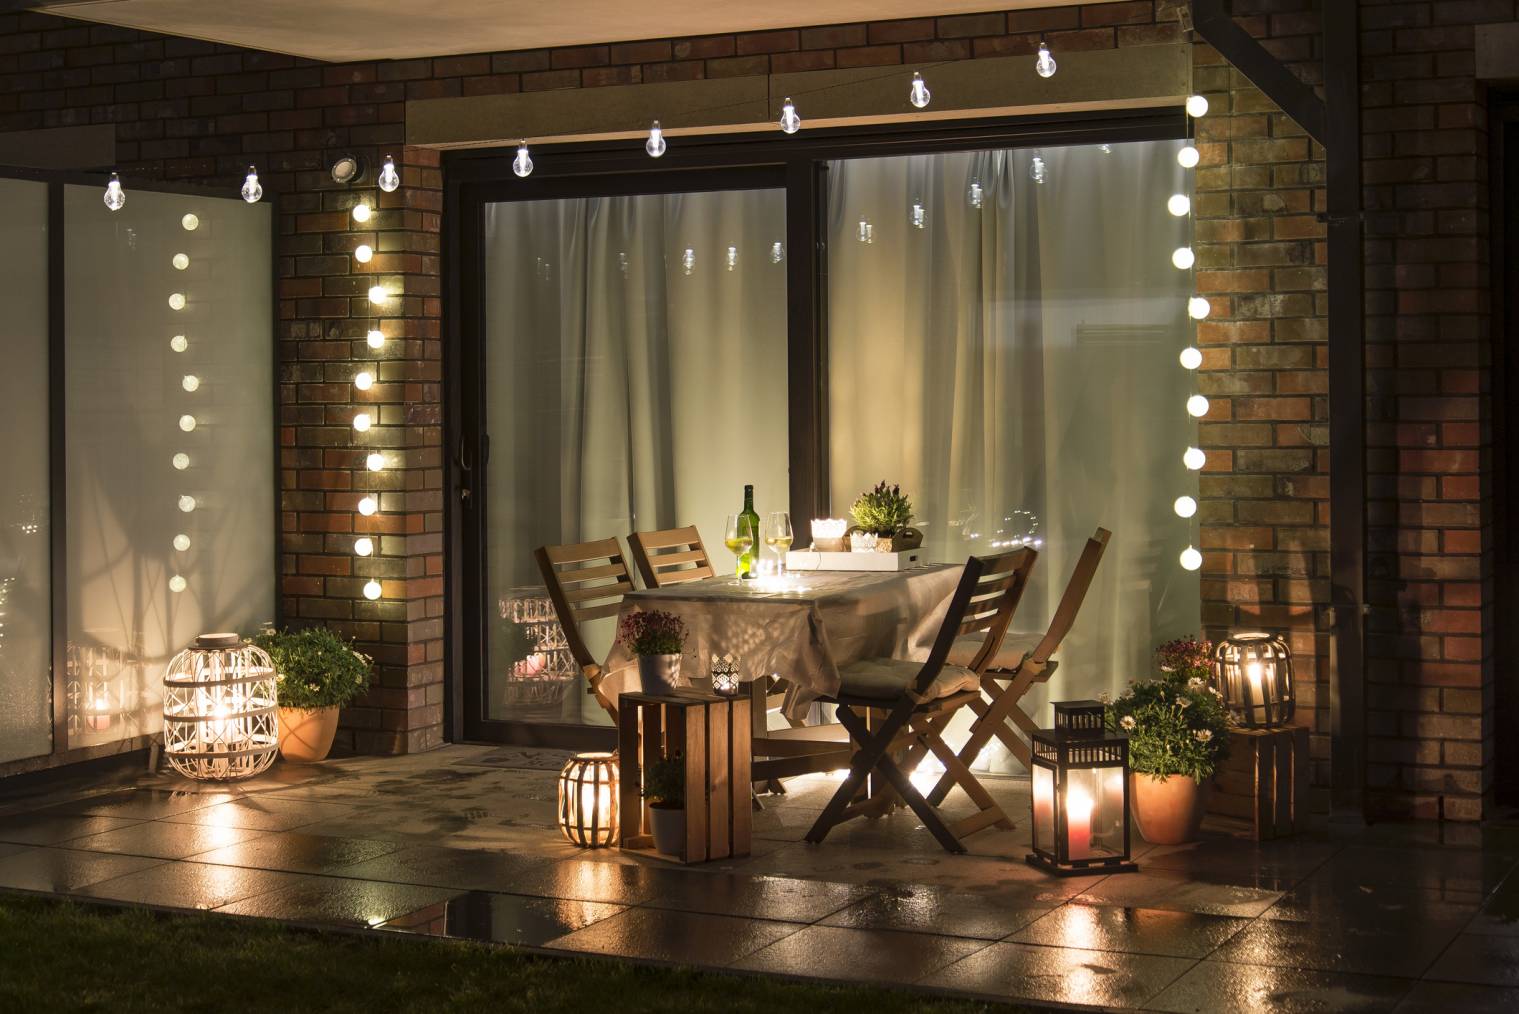 Patio Lights - 5 Sparkling Ideas for Outdoor Patio Lighting